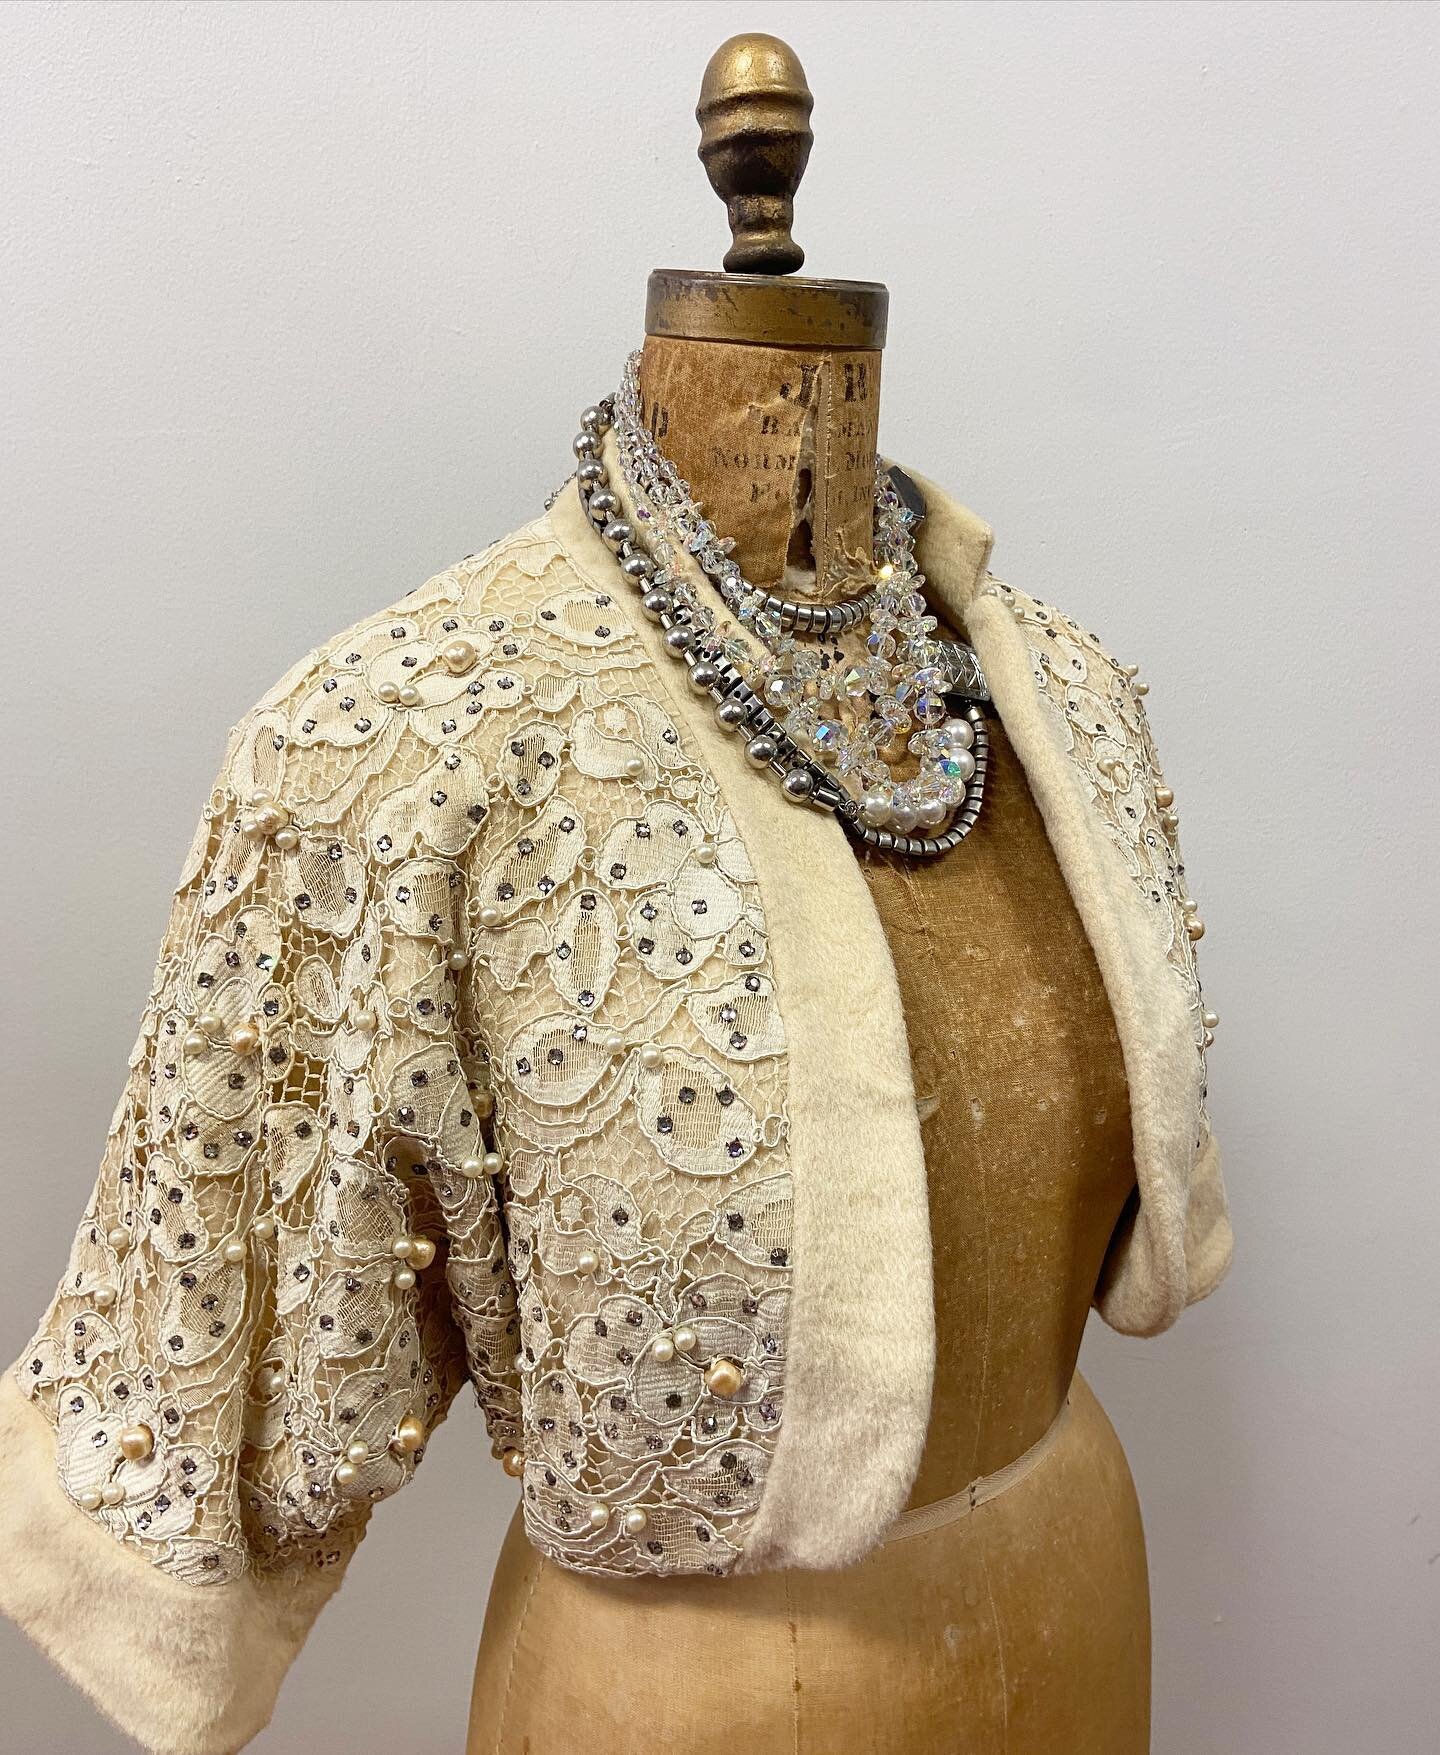 A little bit of bling! 
Beaded Lace Felt Bolero $58.
Vendome 3 Strand Crystals $48.
80s Beaded Chain Necklace $20.
#vintage #dmfordetails